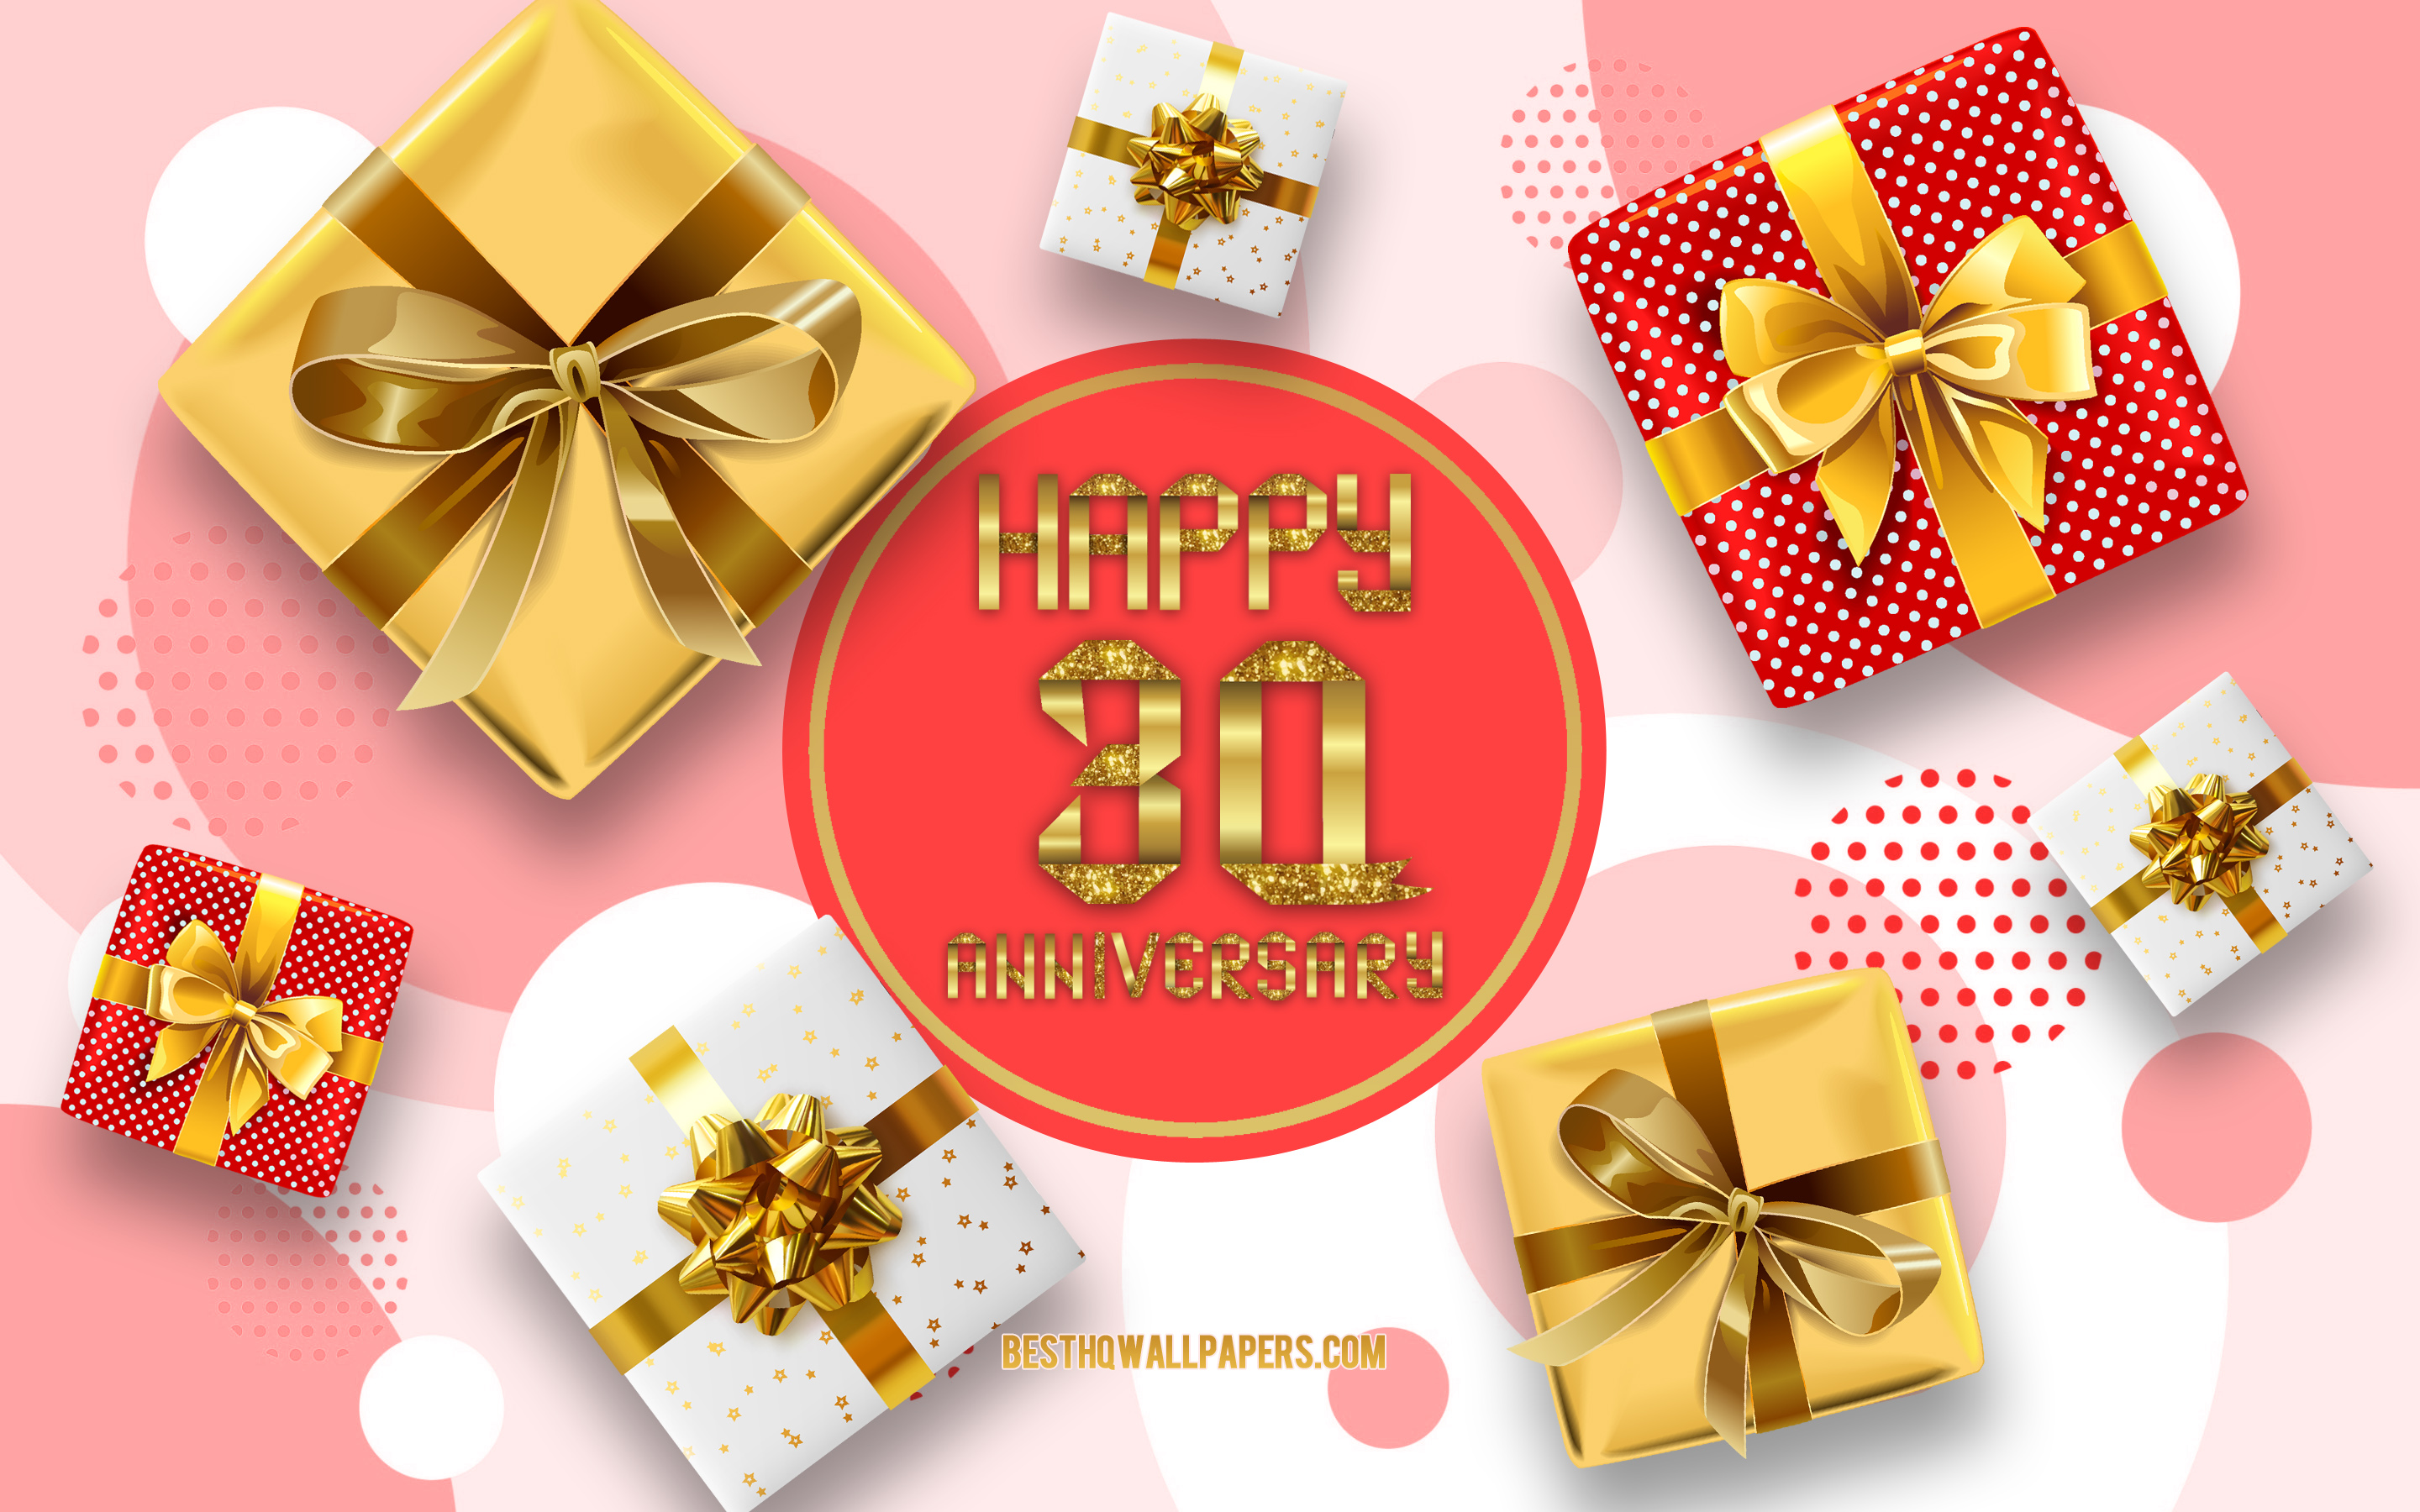 30 Years Anniversary, Anniversary Background With Gift - 50 Años Feliz Cumpleaños , HD Wallpaper & Backgrounds